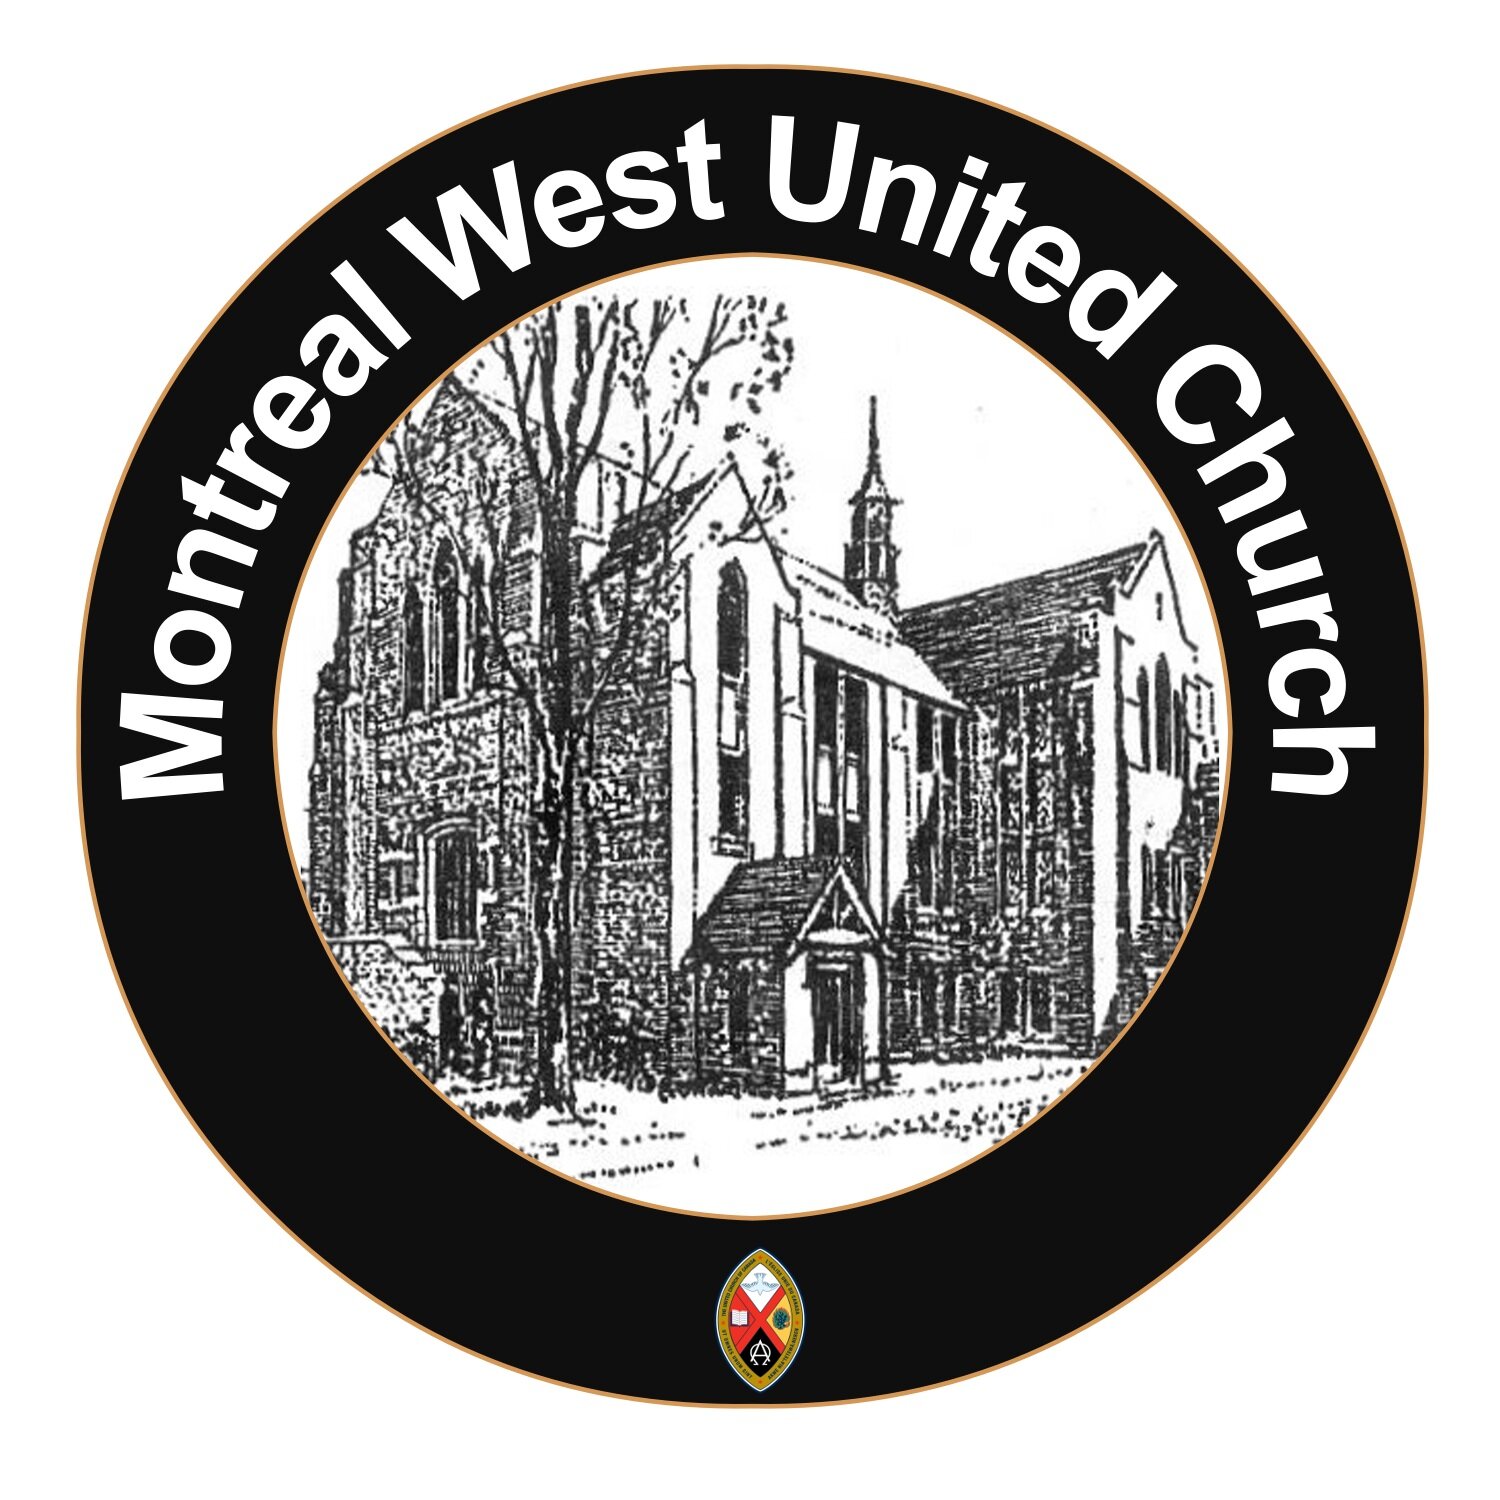 Montreal West United Church